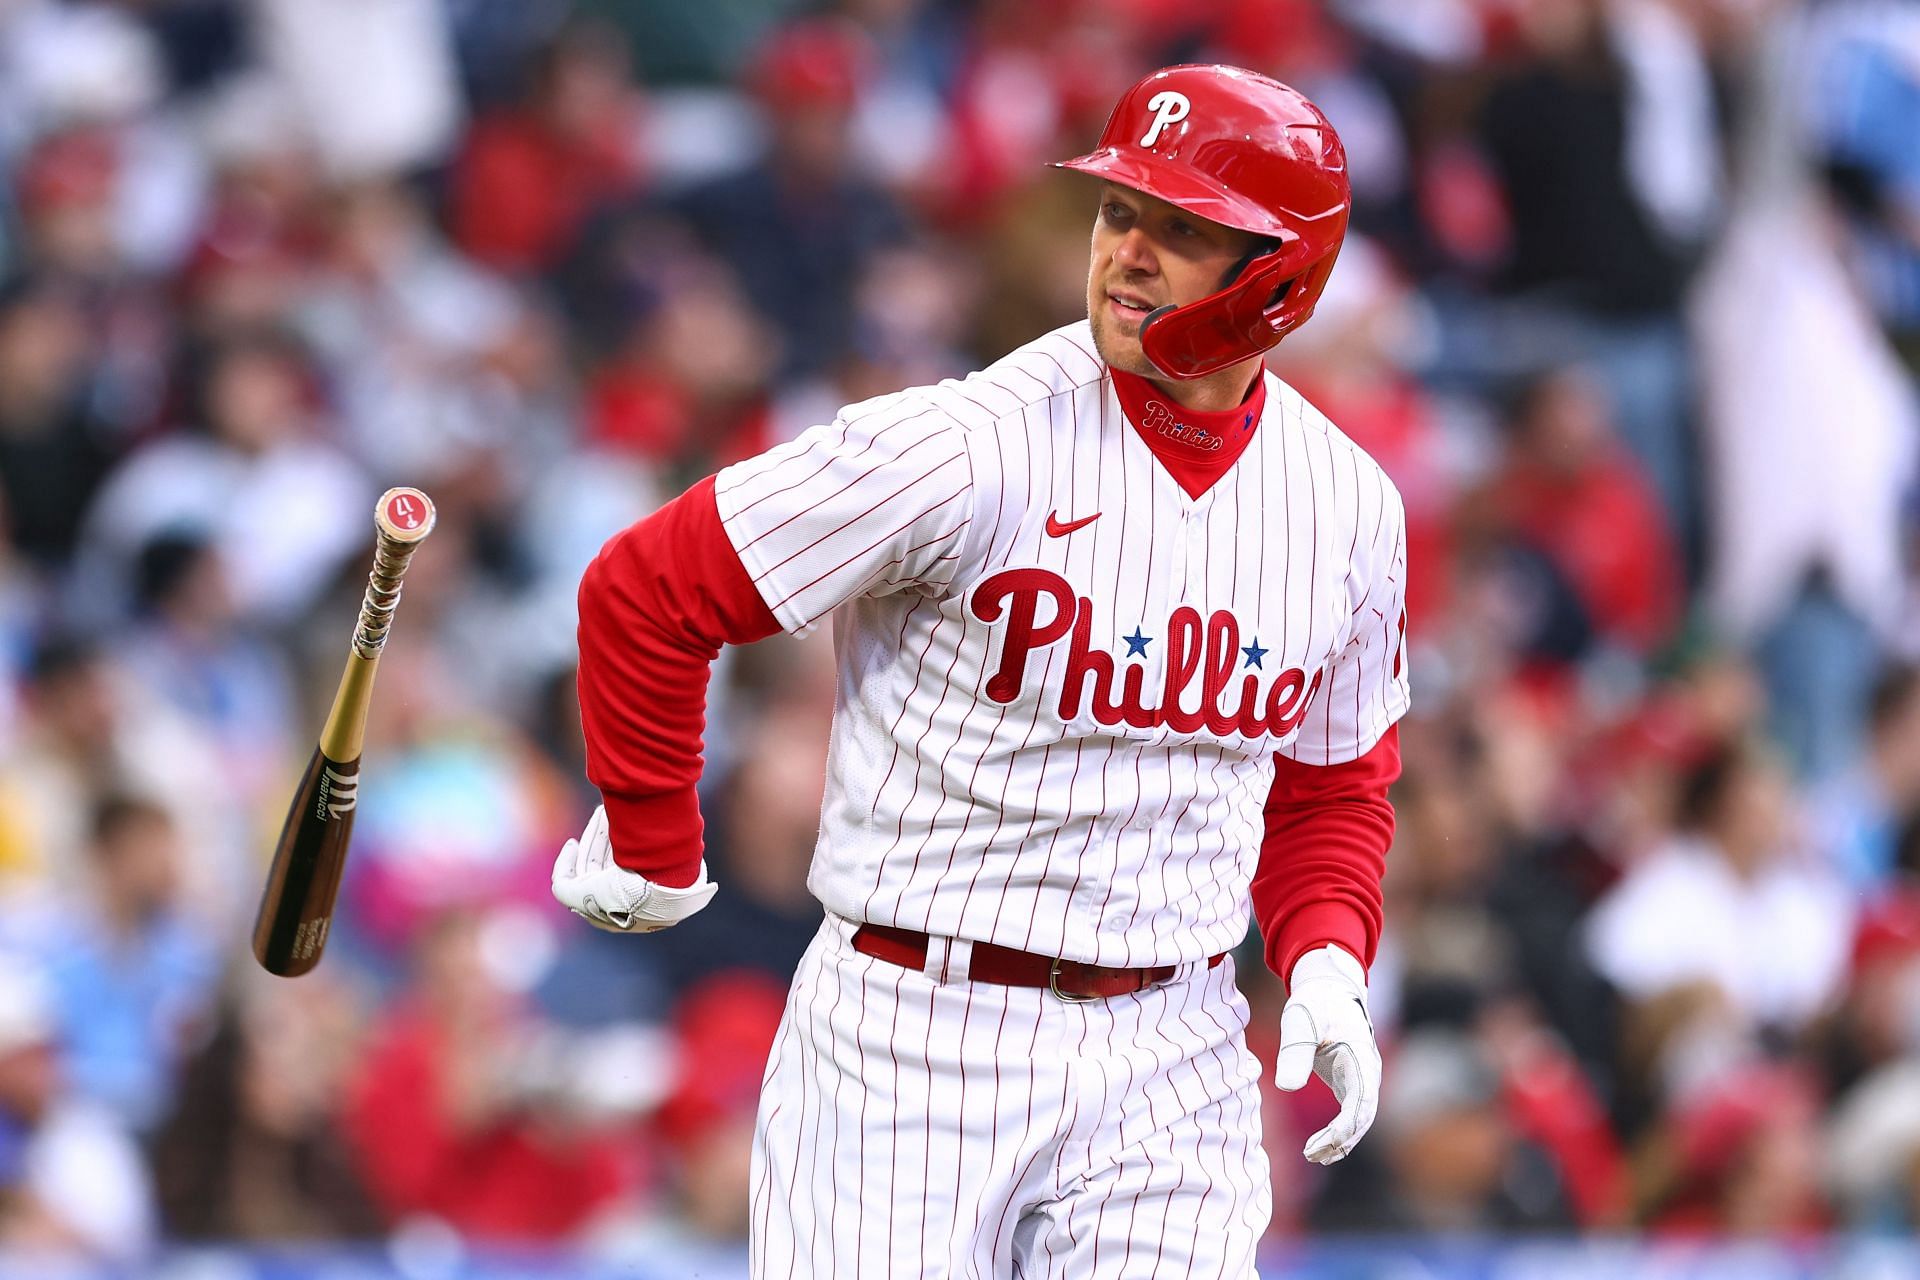 PHILLIES NOTES: Rhys Hoskins relieved after getting his first major league  hit